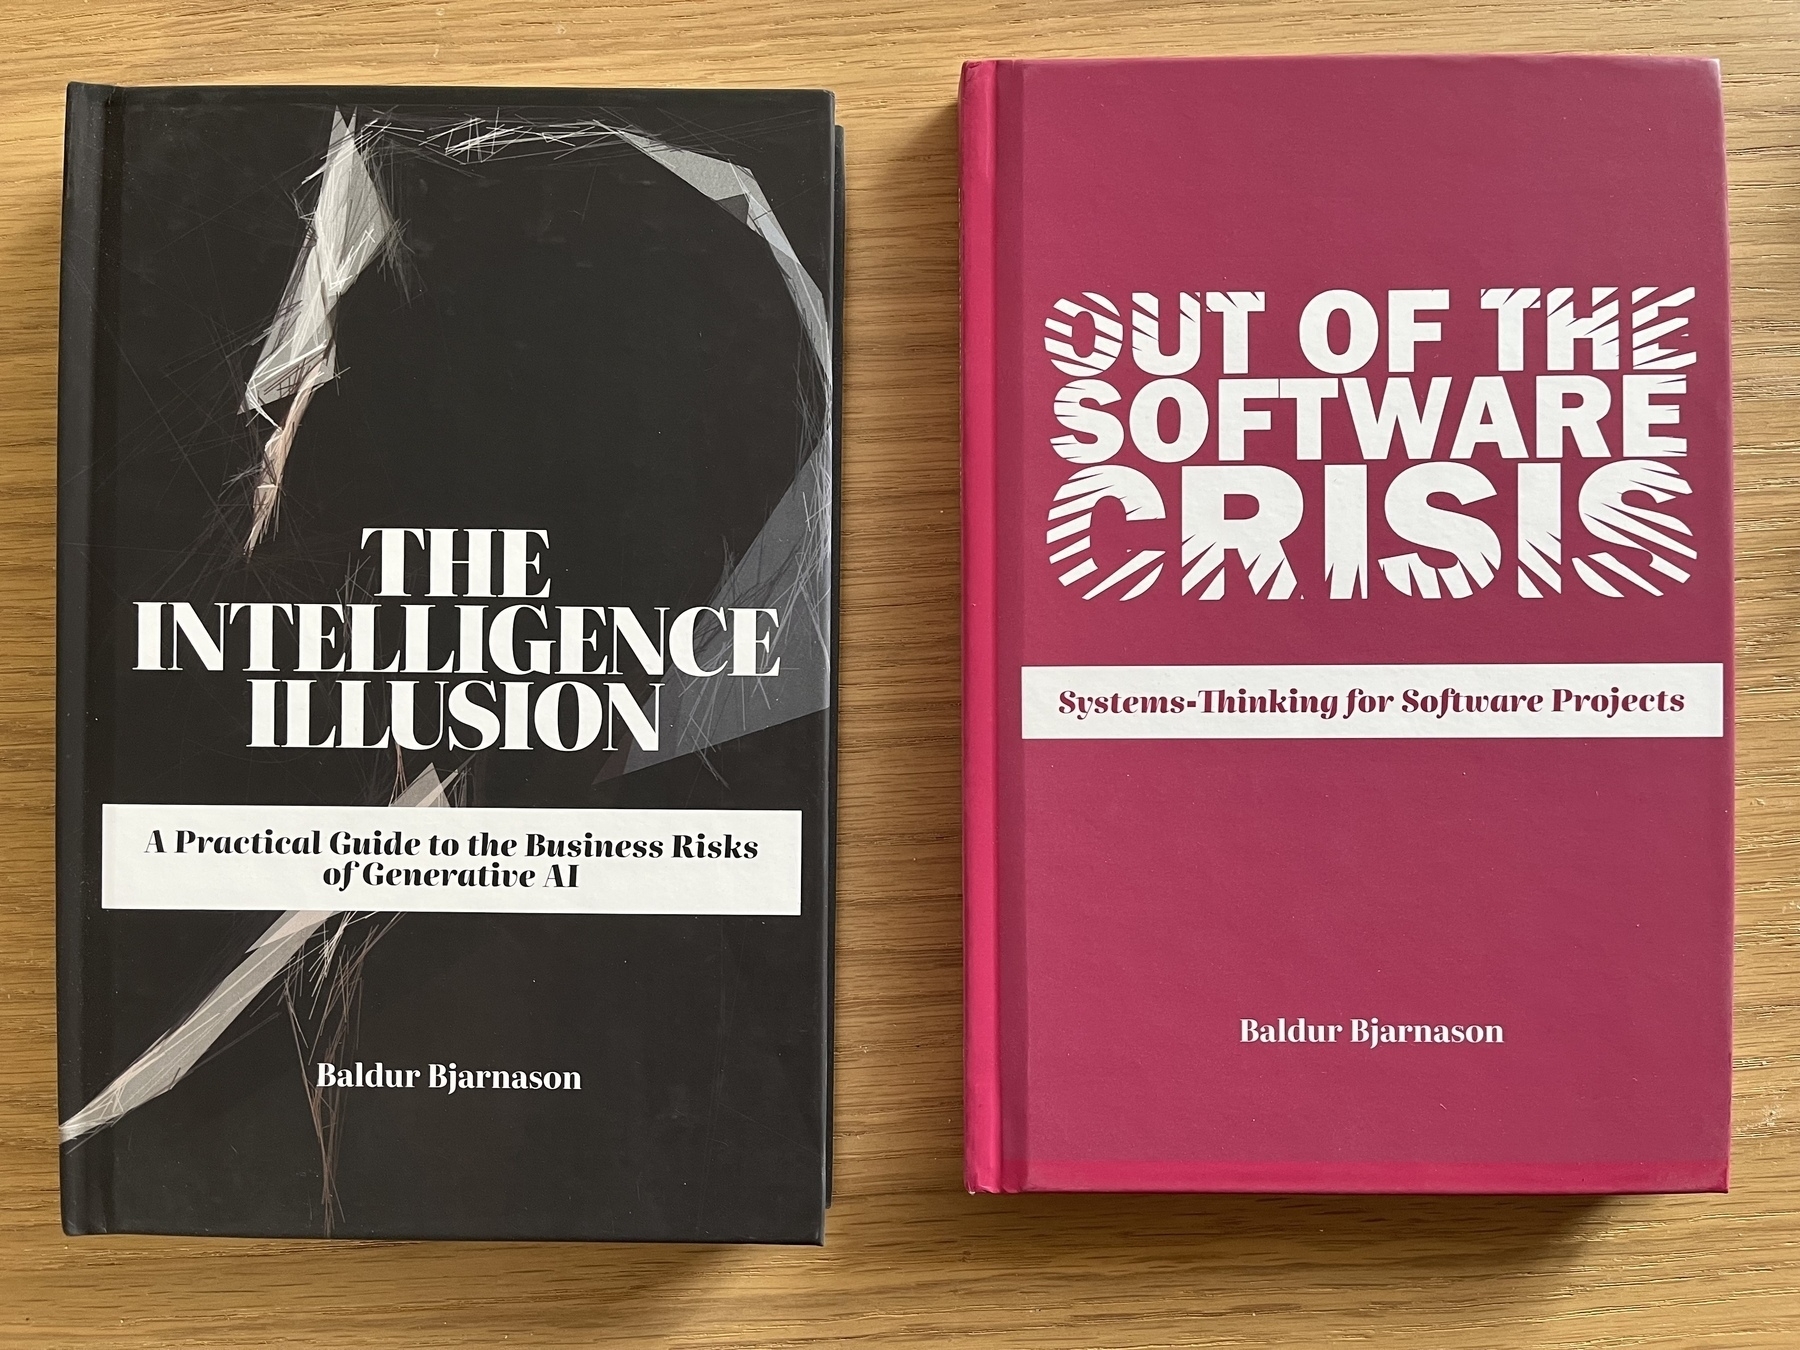 Print versions of my books: The Intelligence Illusion and Out of the Software Crisis. Side by side.